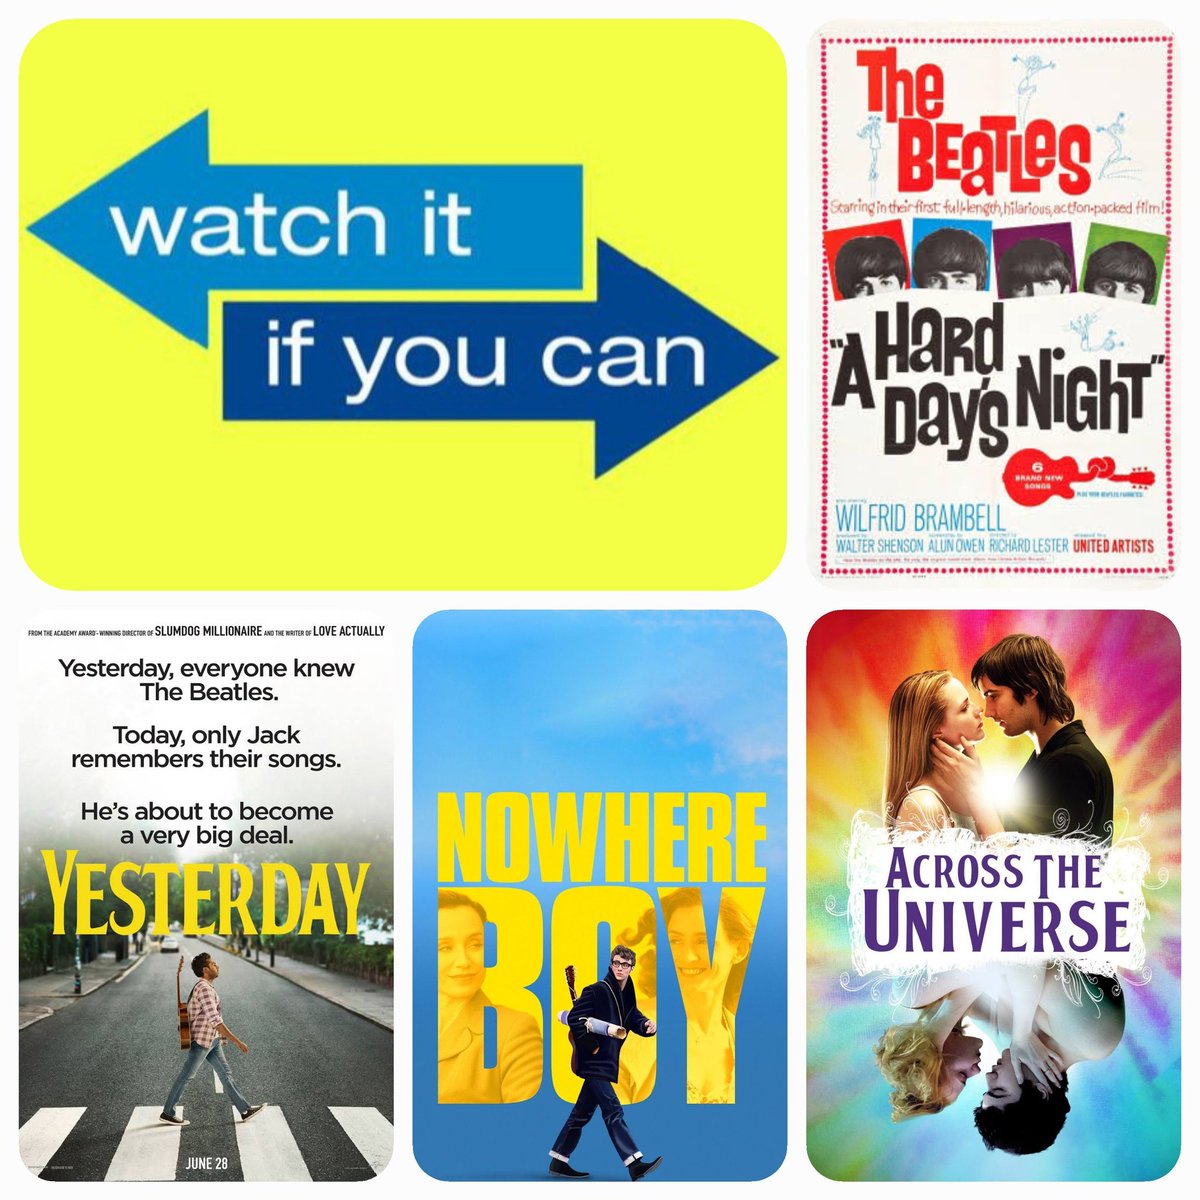 🗓 25th June is Global Beatles Day!

Here are some of our favourite Beatles themed movies 🎵🎵

Any you haven't seen? Then maybe...
just maybe #watchitifyoucan 

#TheBeatles @thebeatles #PaulMcCartney #Lennon #Ringo #GeorgeHarrison #FabFour #GlobalBeatlesDay #today